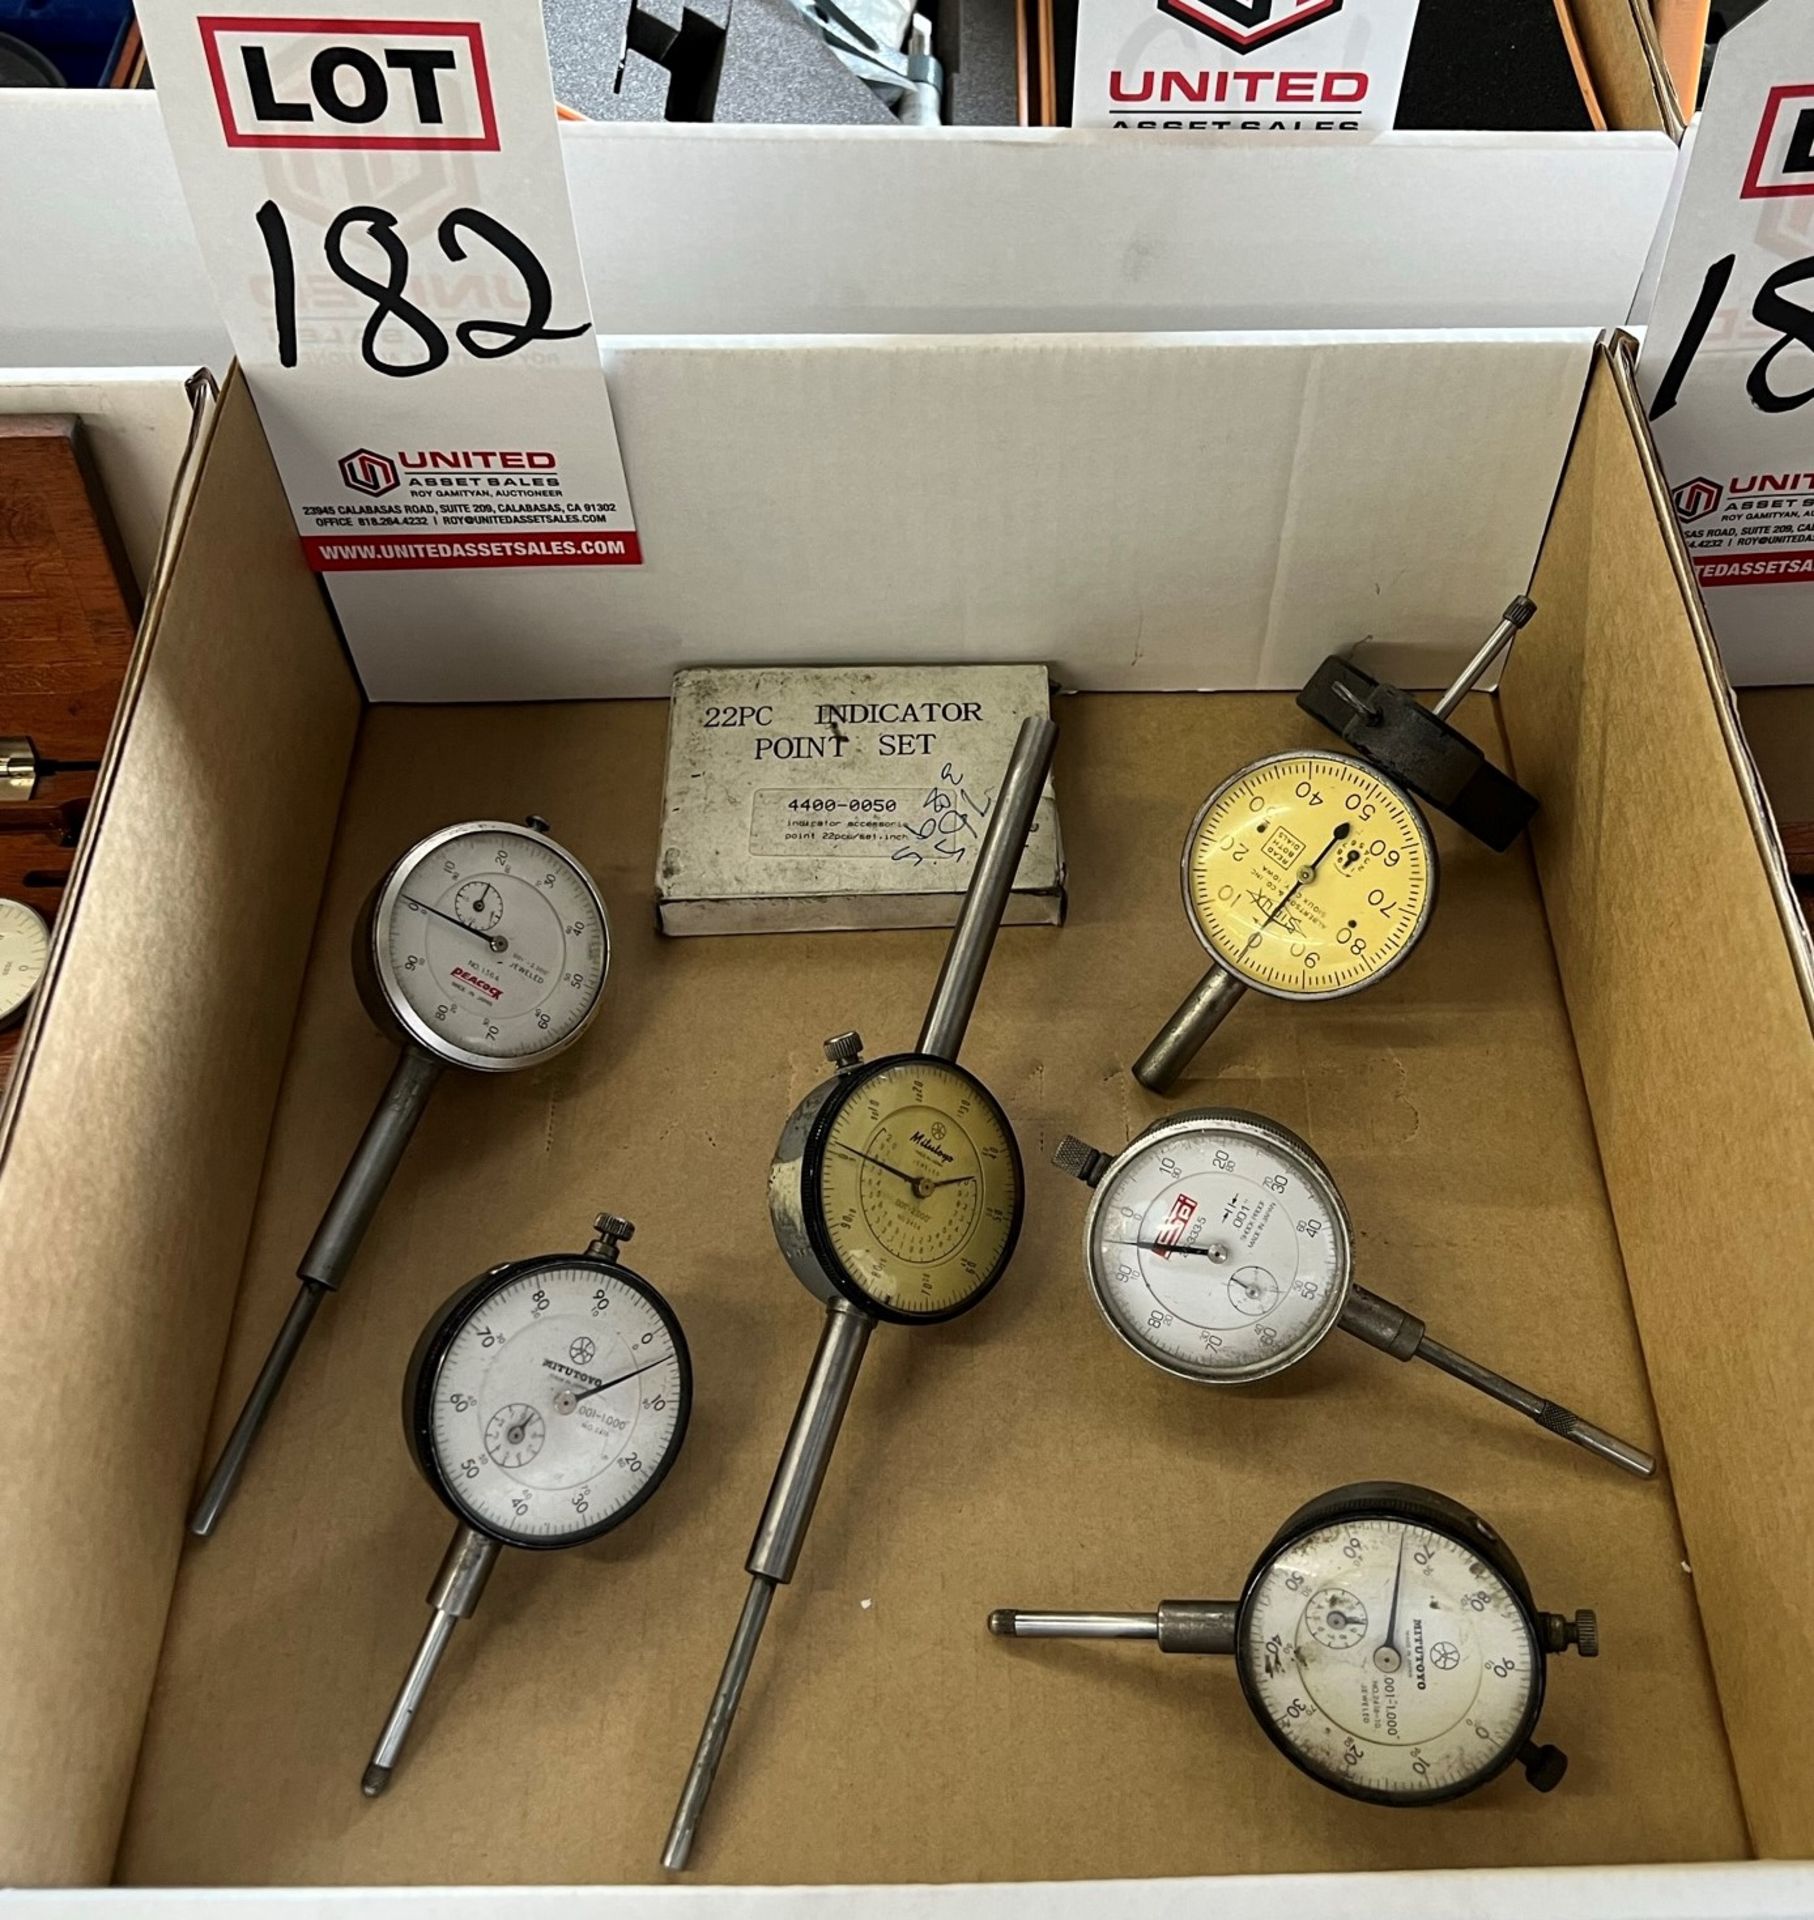 LOT - (6) DIAL INDICATORS AND (1) INDICATOR POINT SET